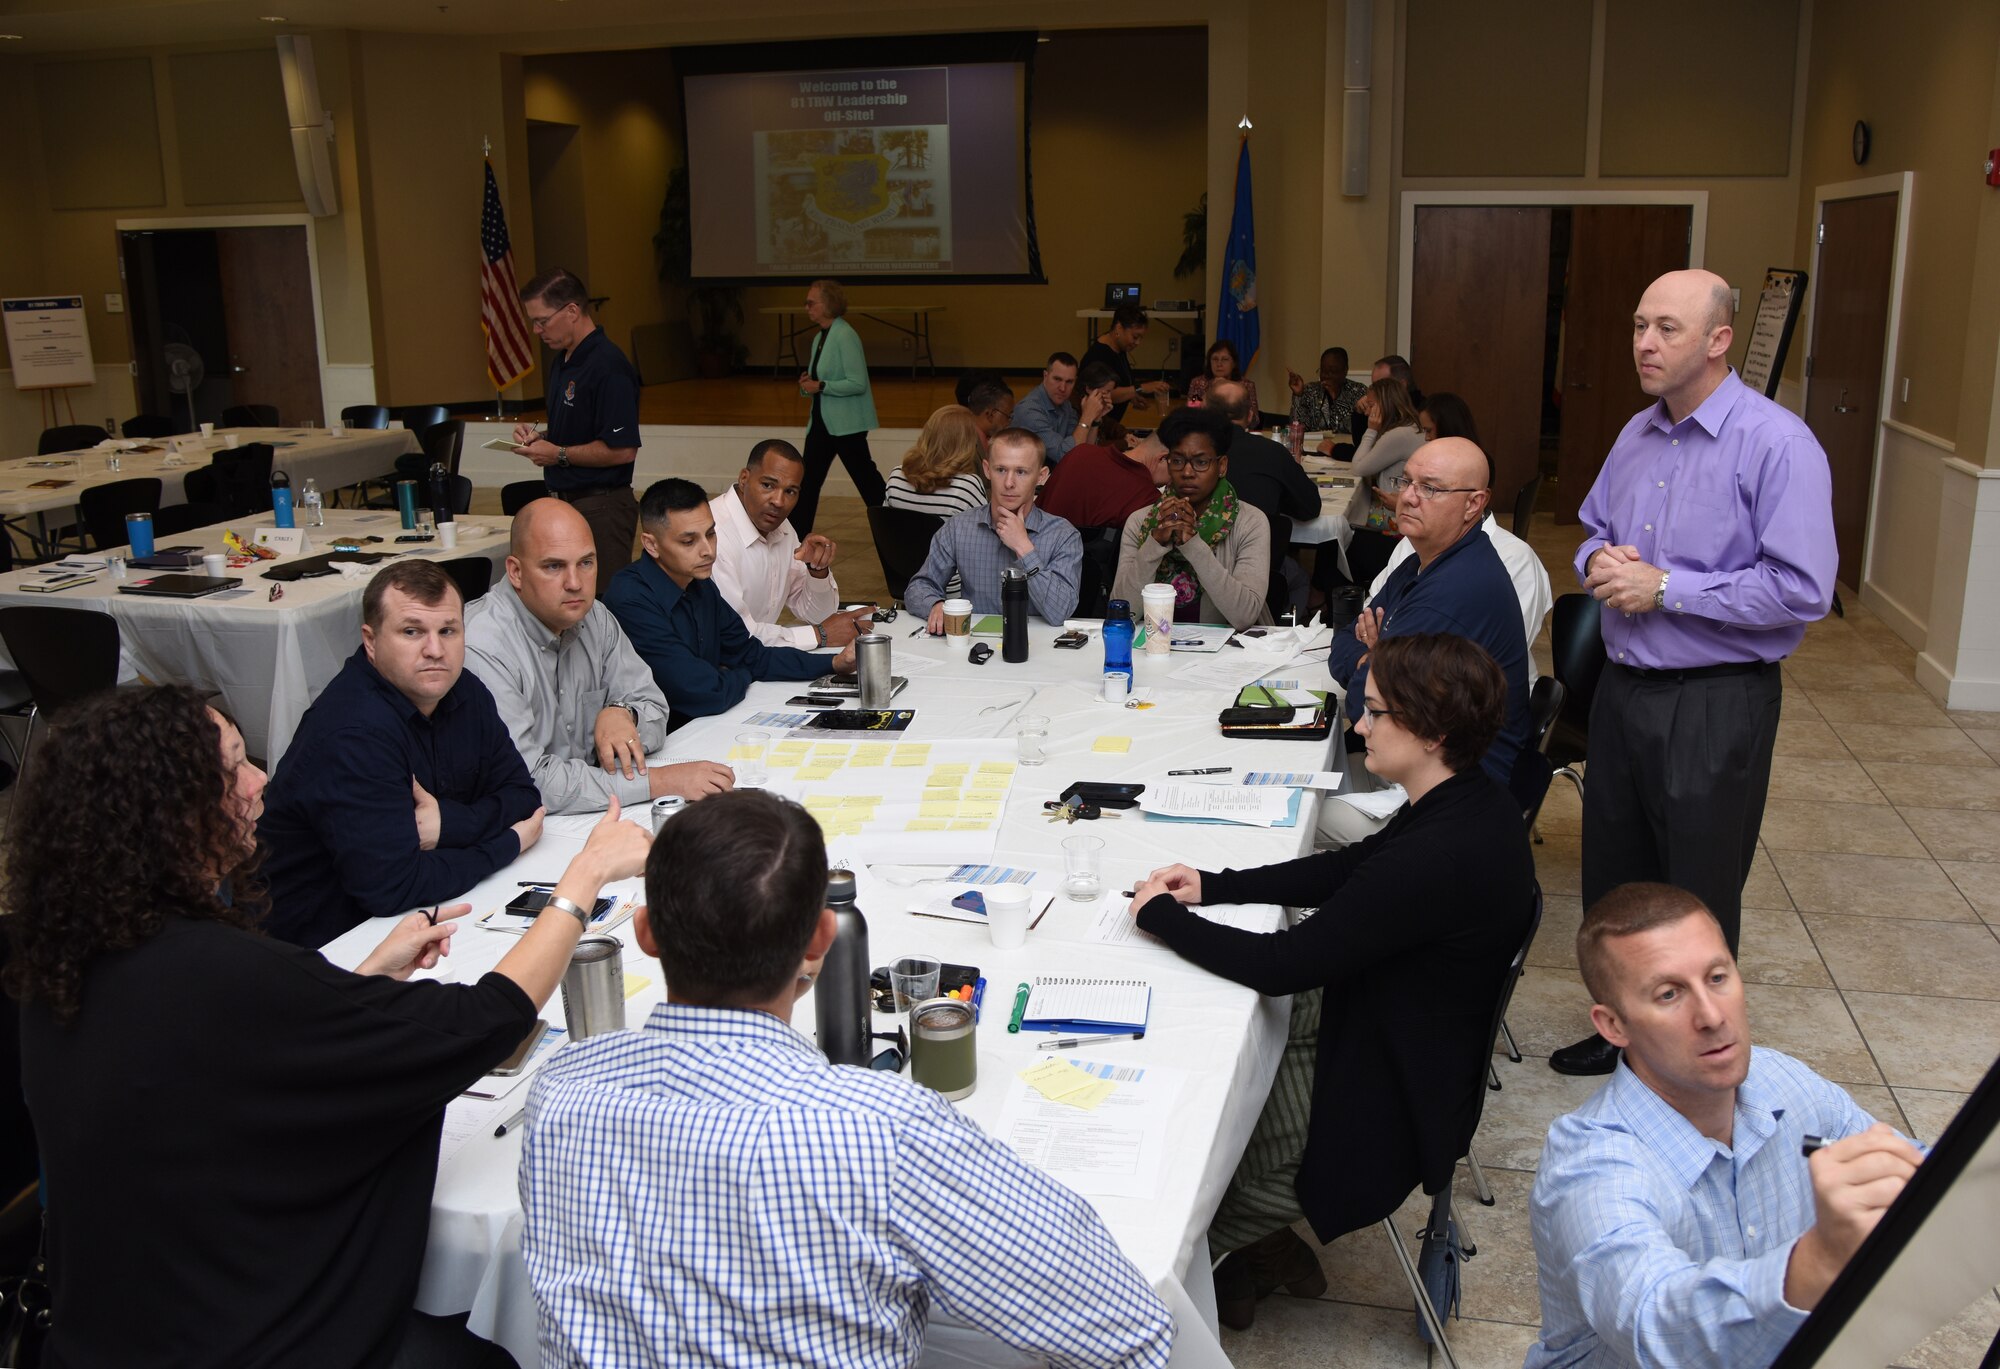 Keesler leadership participates in a small group discussion during the 81st Training Wing Spring 2018 Off-Site Commander’s Conference at The Salvation Army Kroc Center in Biloxi, Mississippi, May 2, 2018. The two-day event allowed senior leaders to step away from their day-to-day activities and focus on improving themselves as leaders. (U.S. Air Force photo by Kemberly Groue)